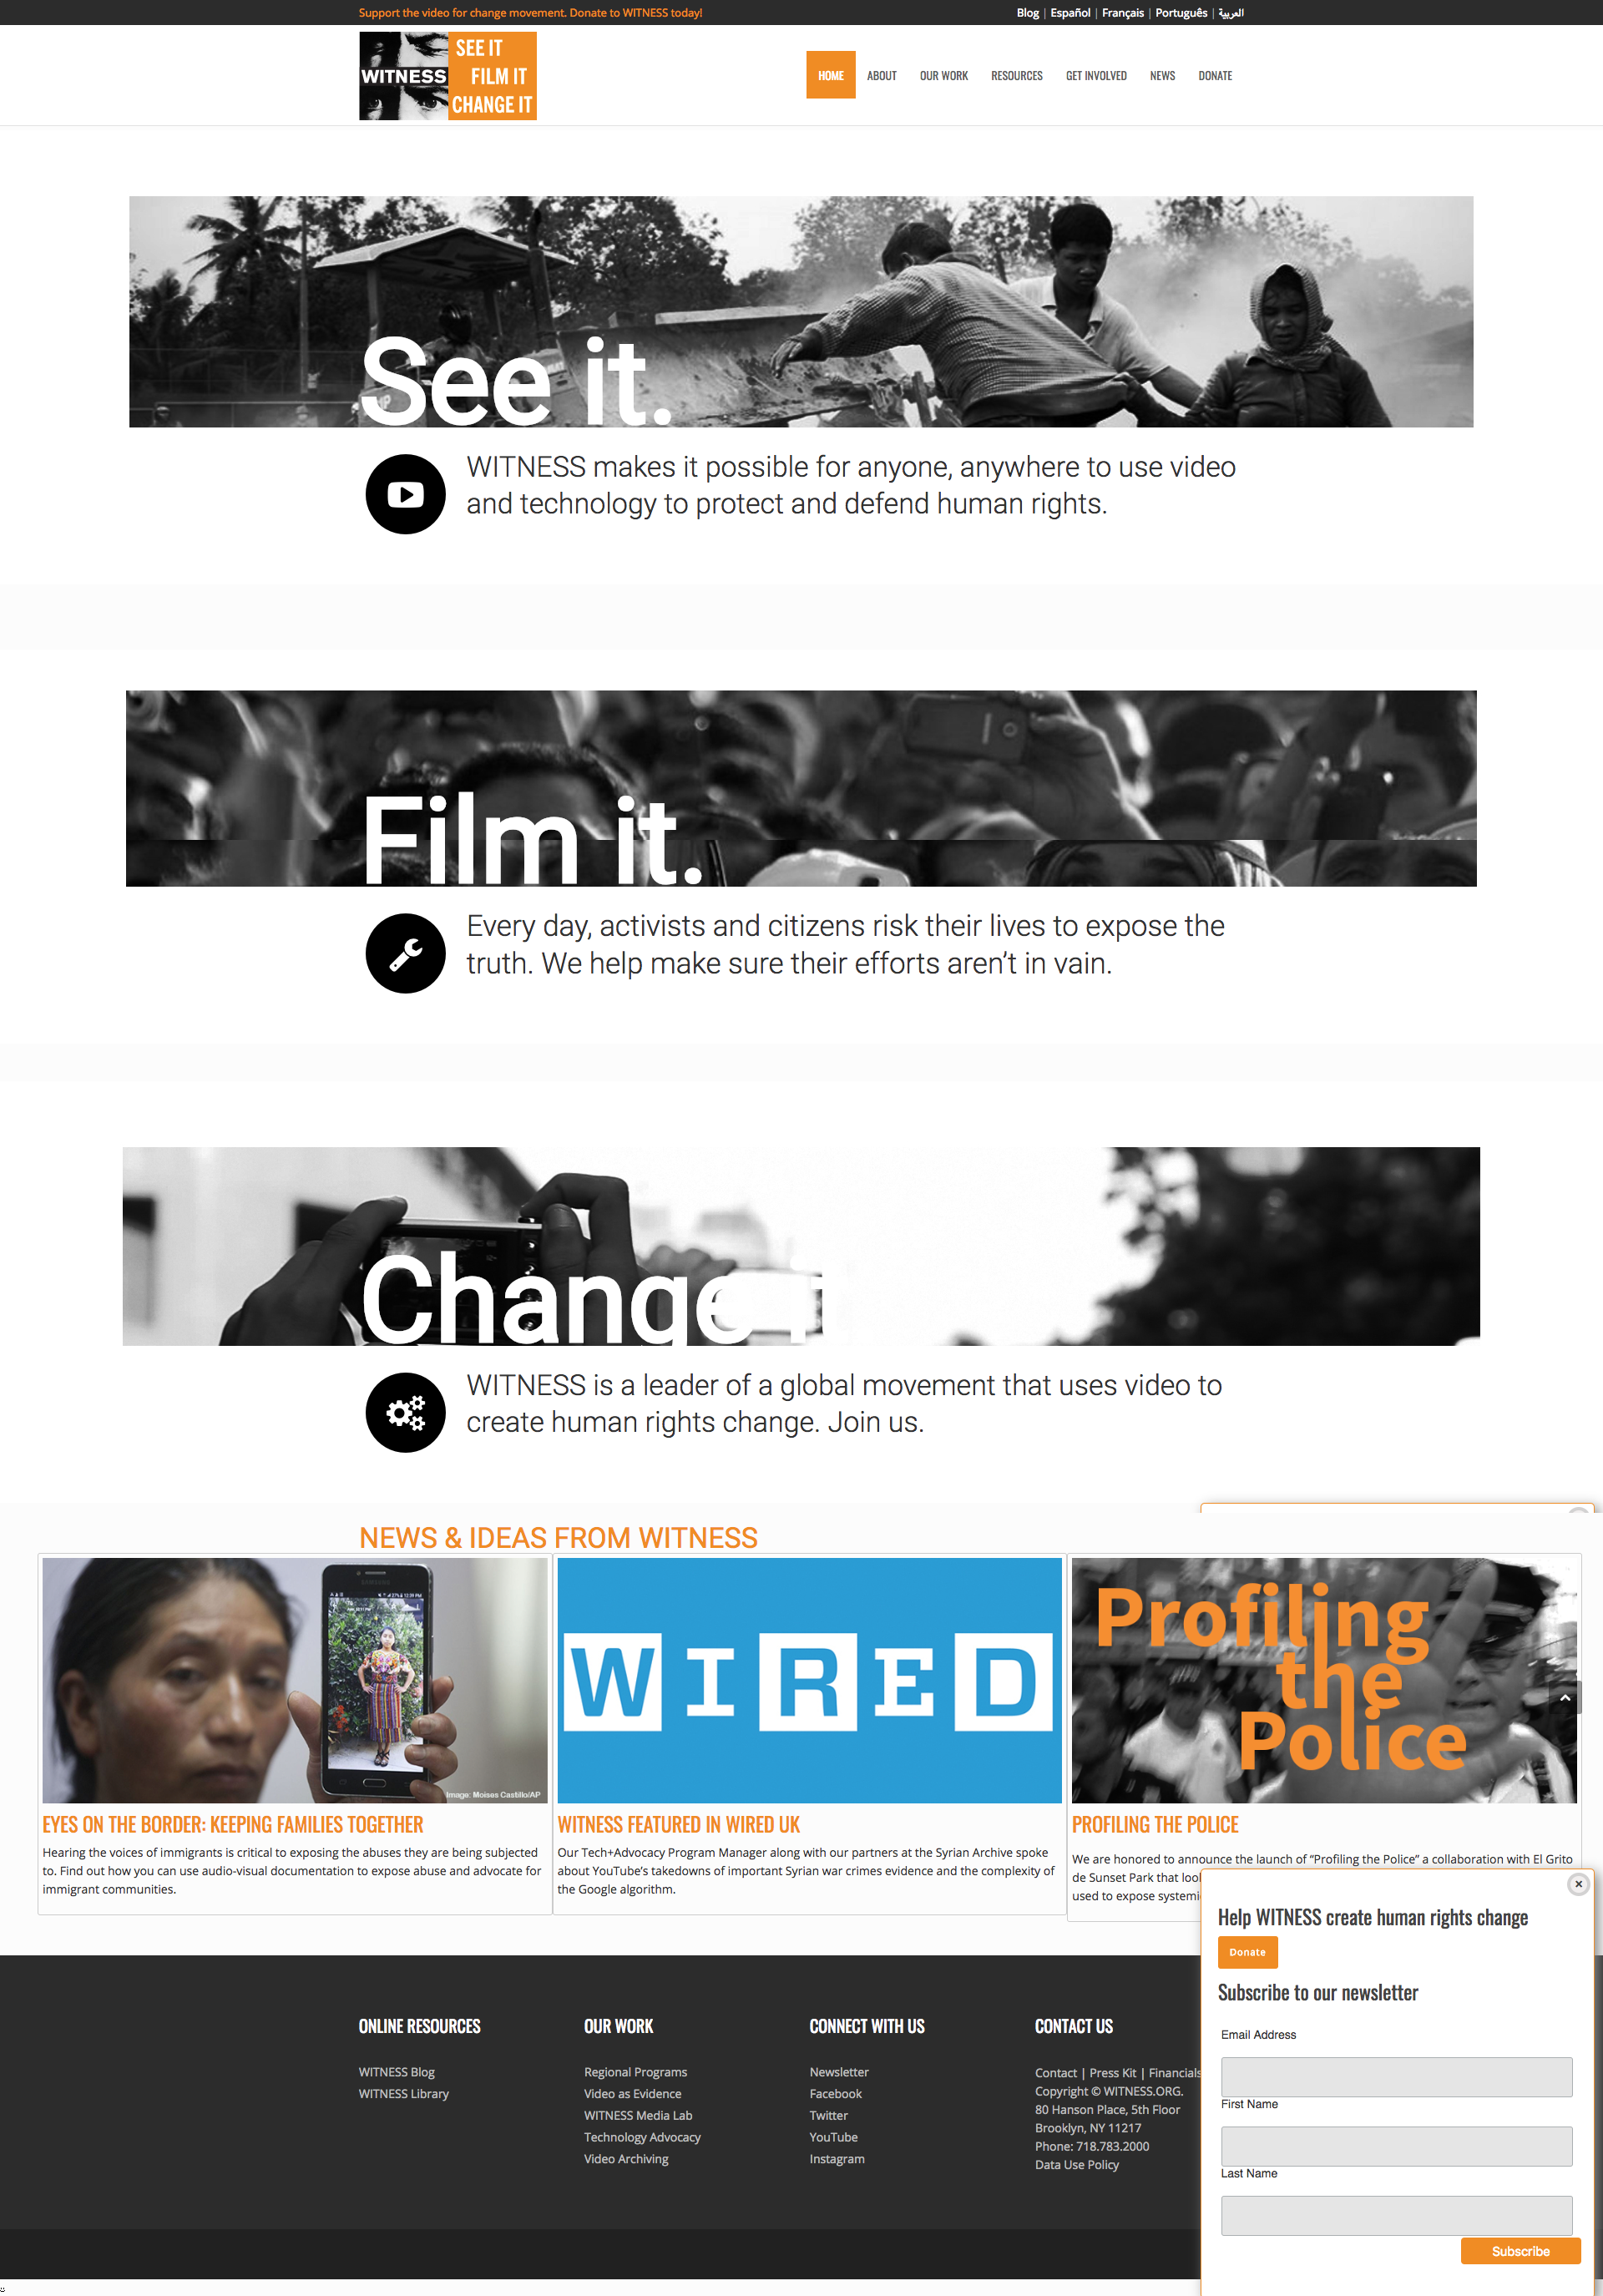 Homepage in English; See it, Film it, Change it, on black and white photographs from Witness' work around the world